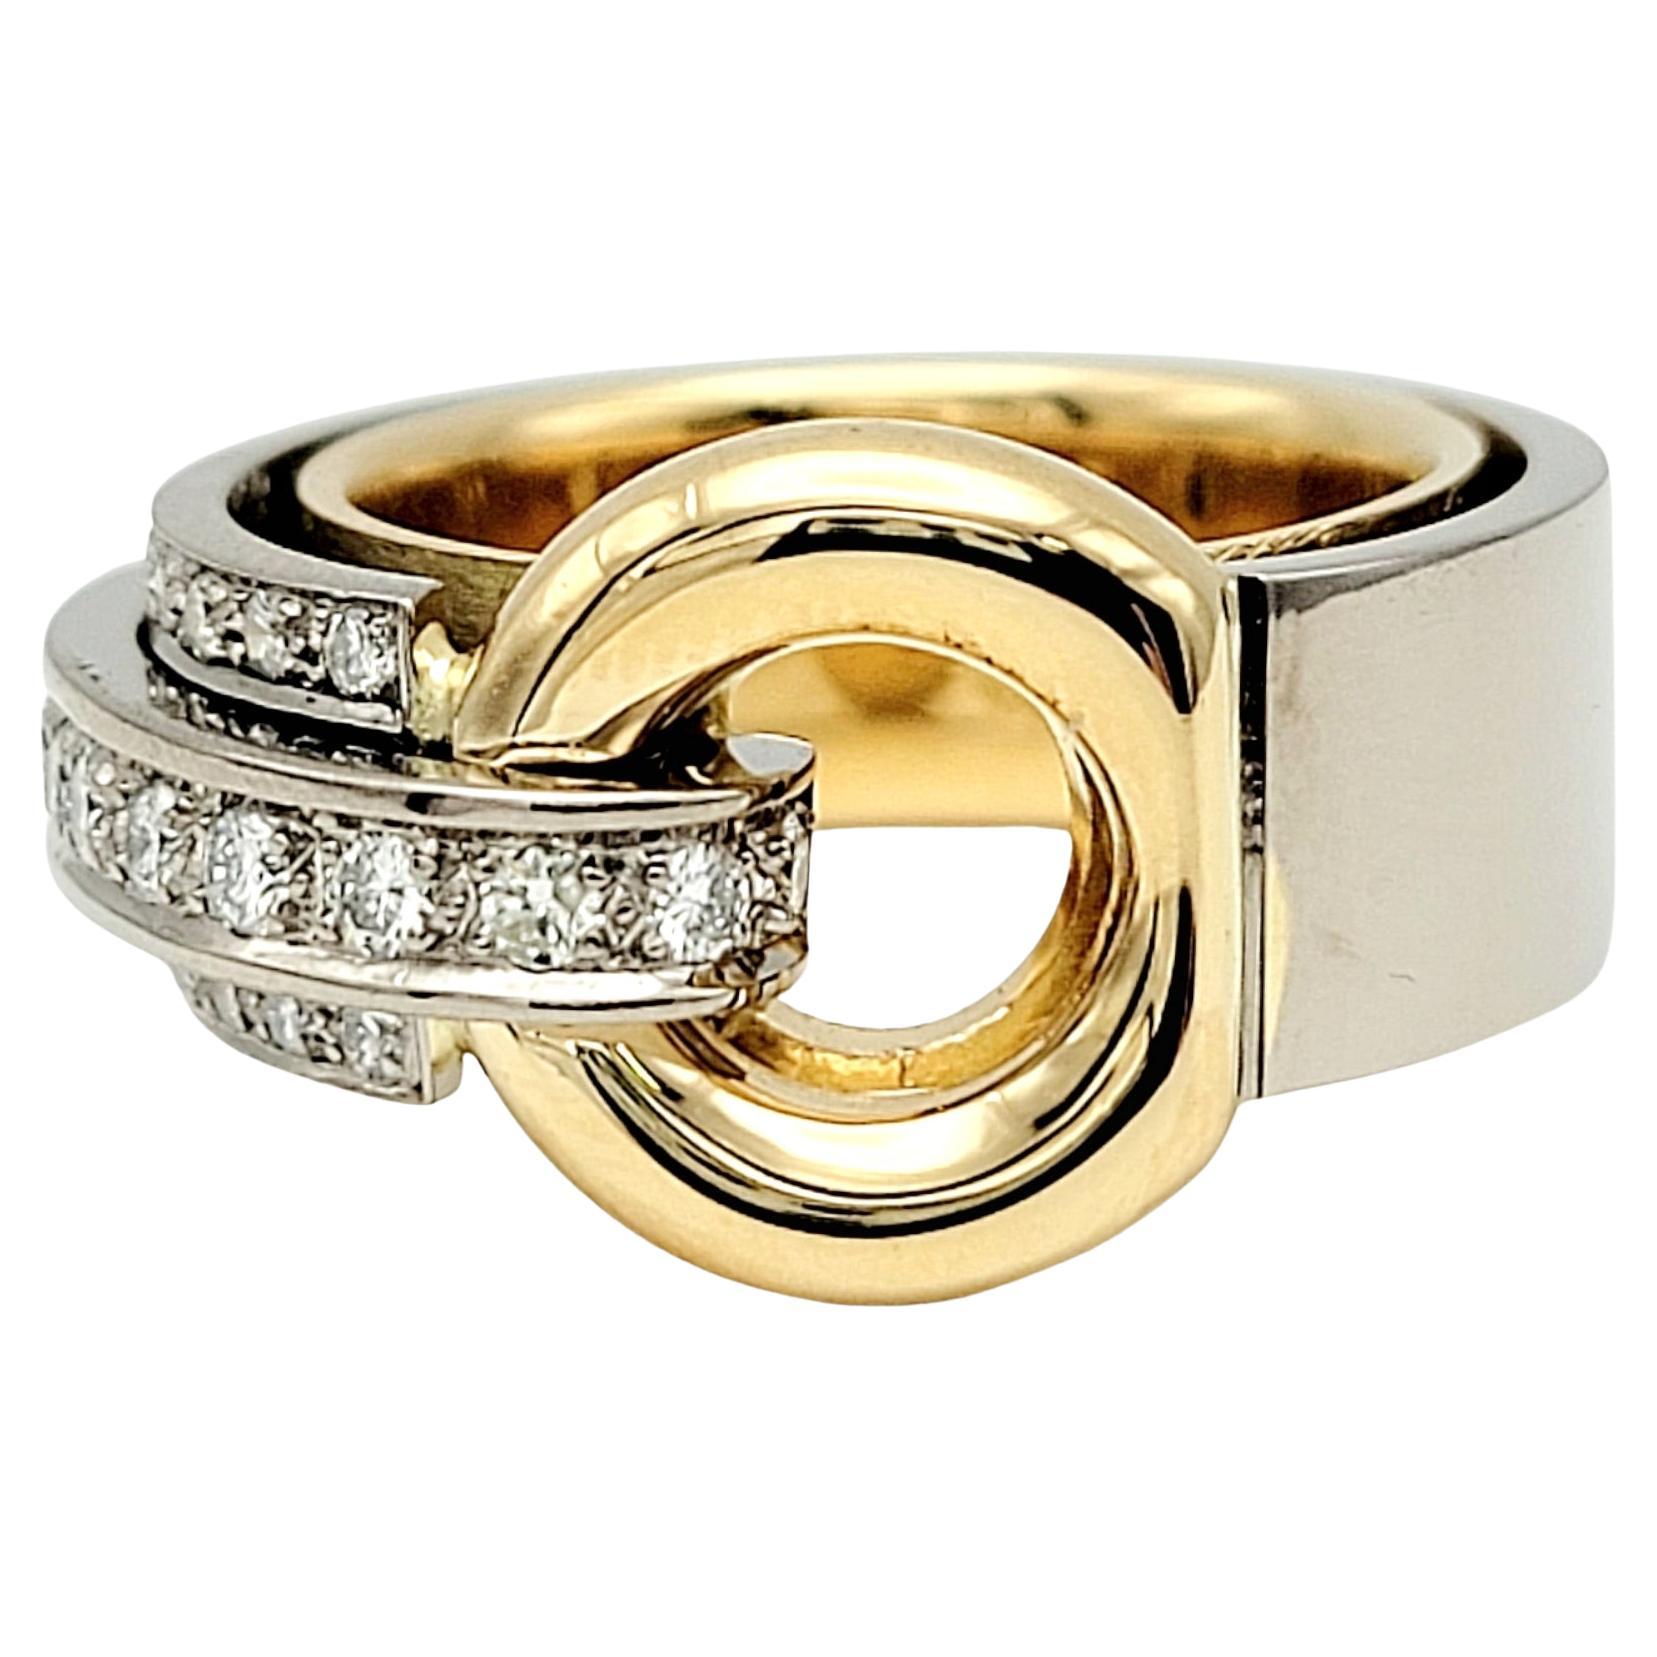 Contemporary Geometric Design Negative Space Asymmetric Band Ring with Diamonds